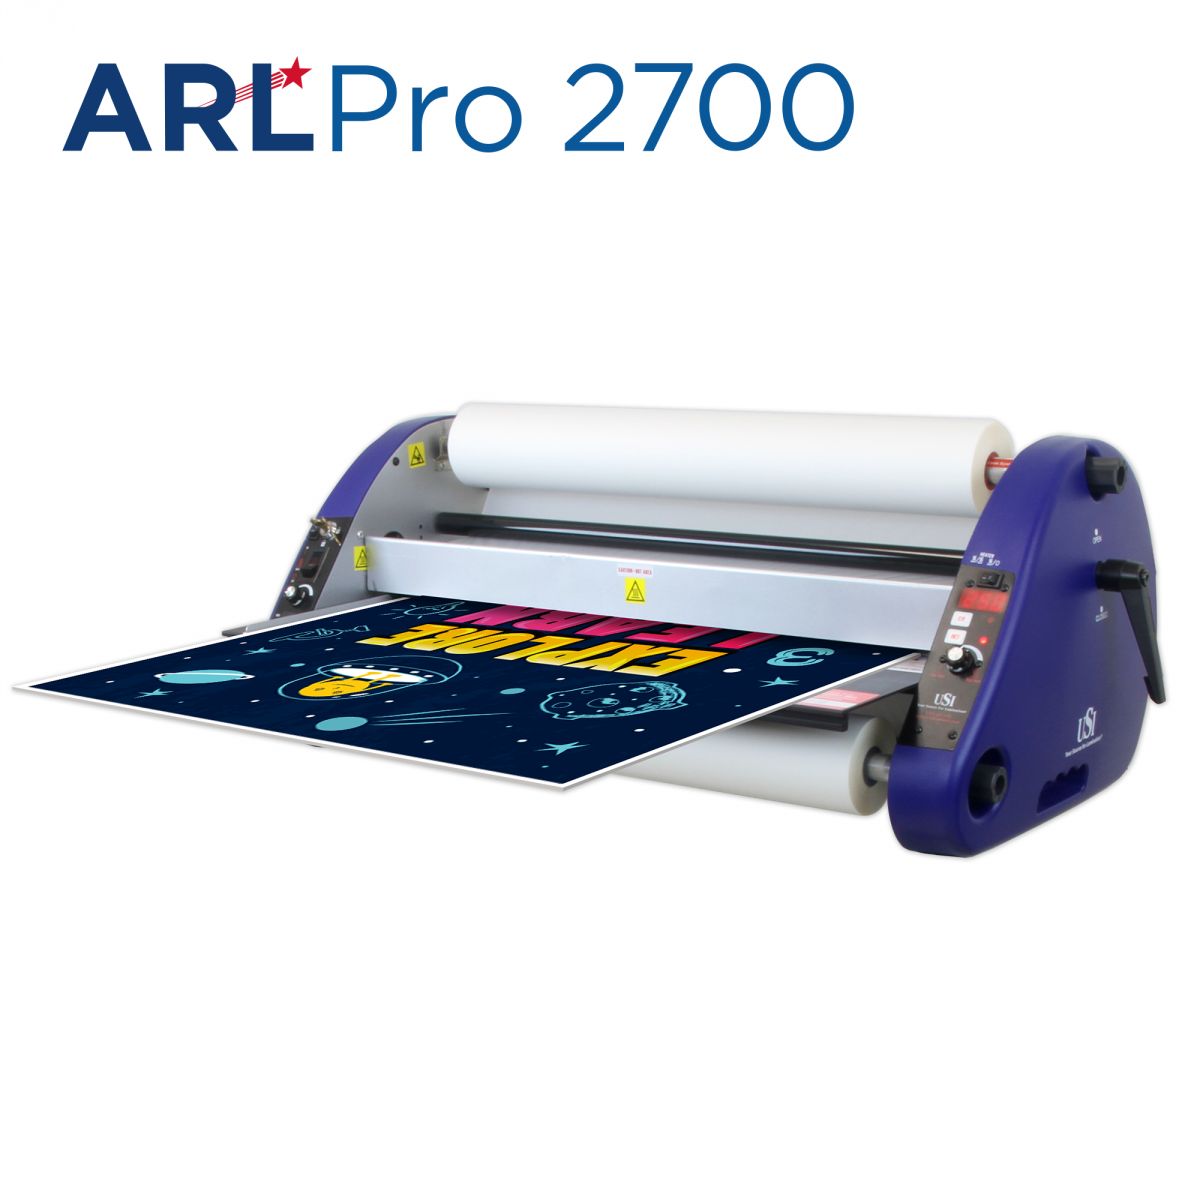 USI ARL Pro 2700 27" Mounting Roll Laminator - $1,849.95 Price Includes Shipping in the Continental USA